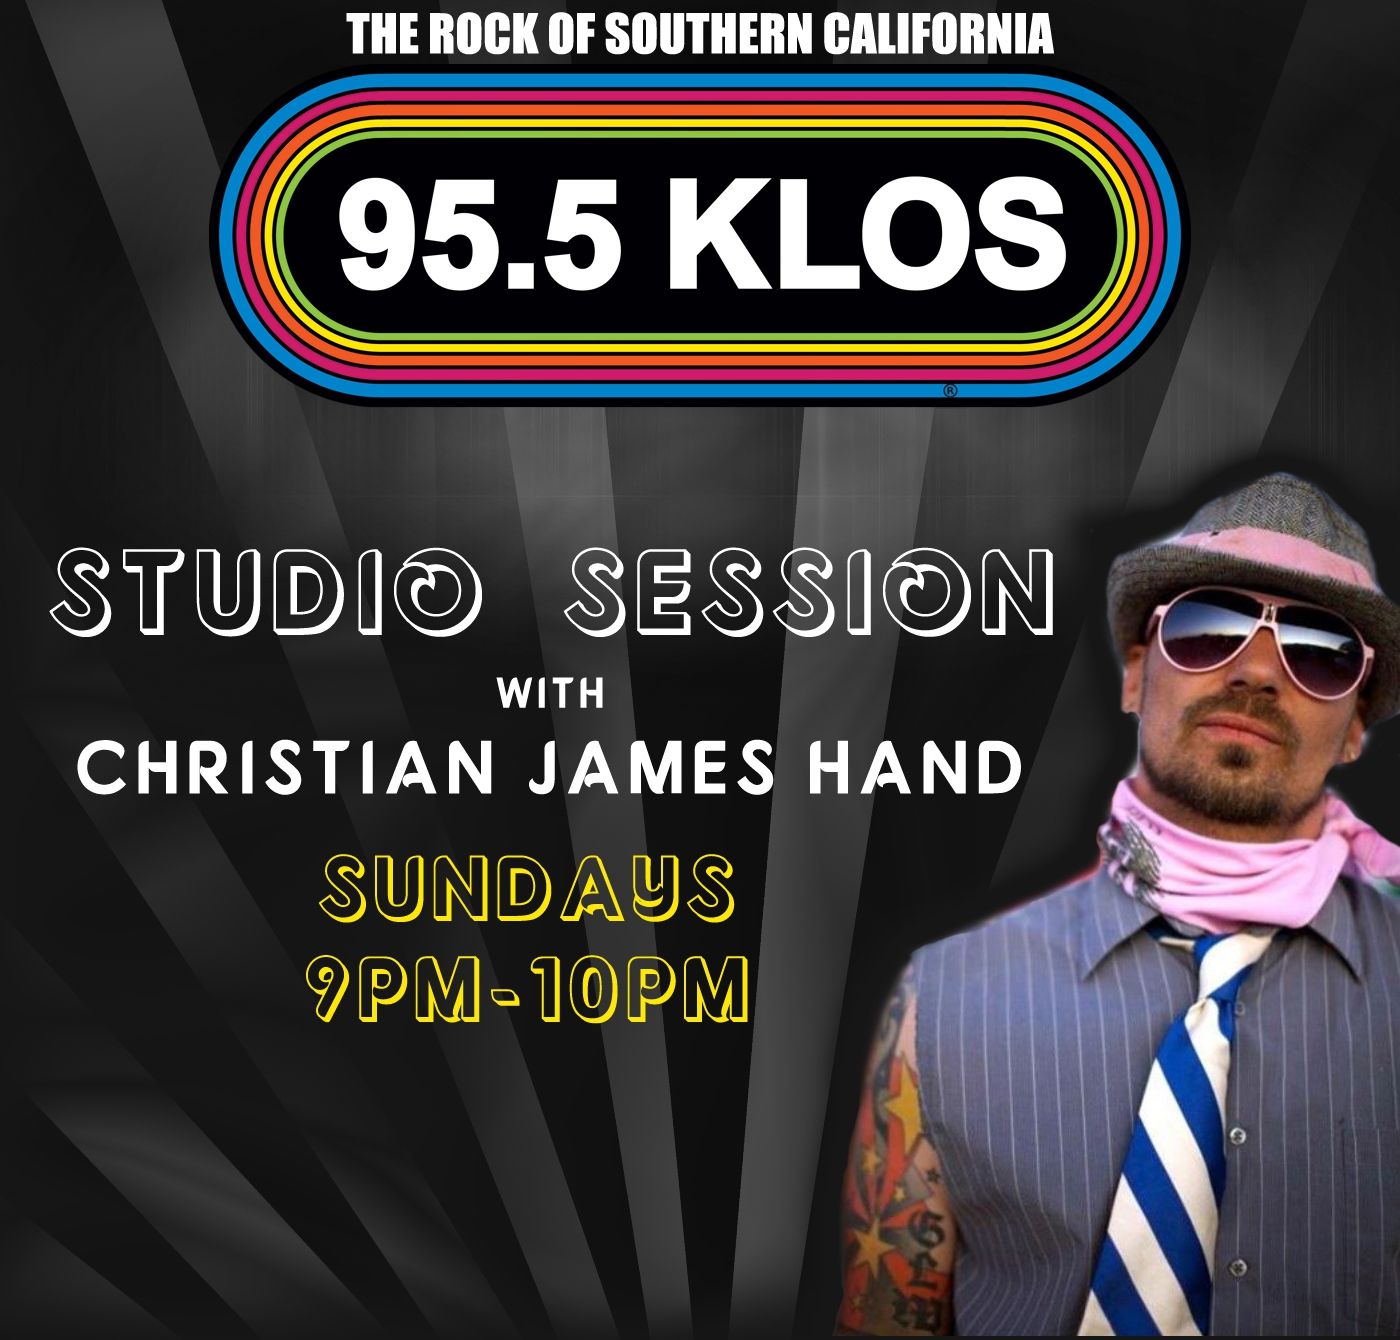 Studio Sessions with Christian James Hand